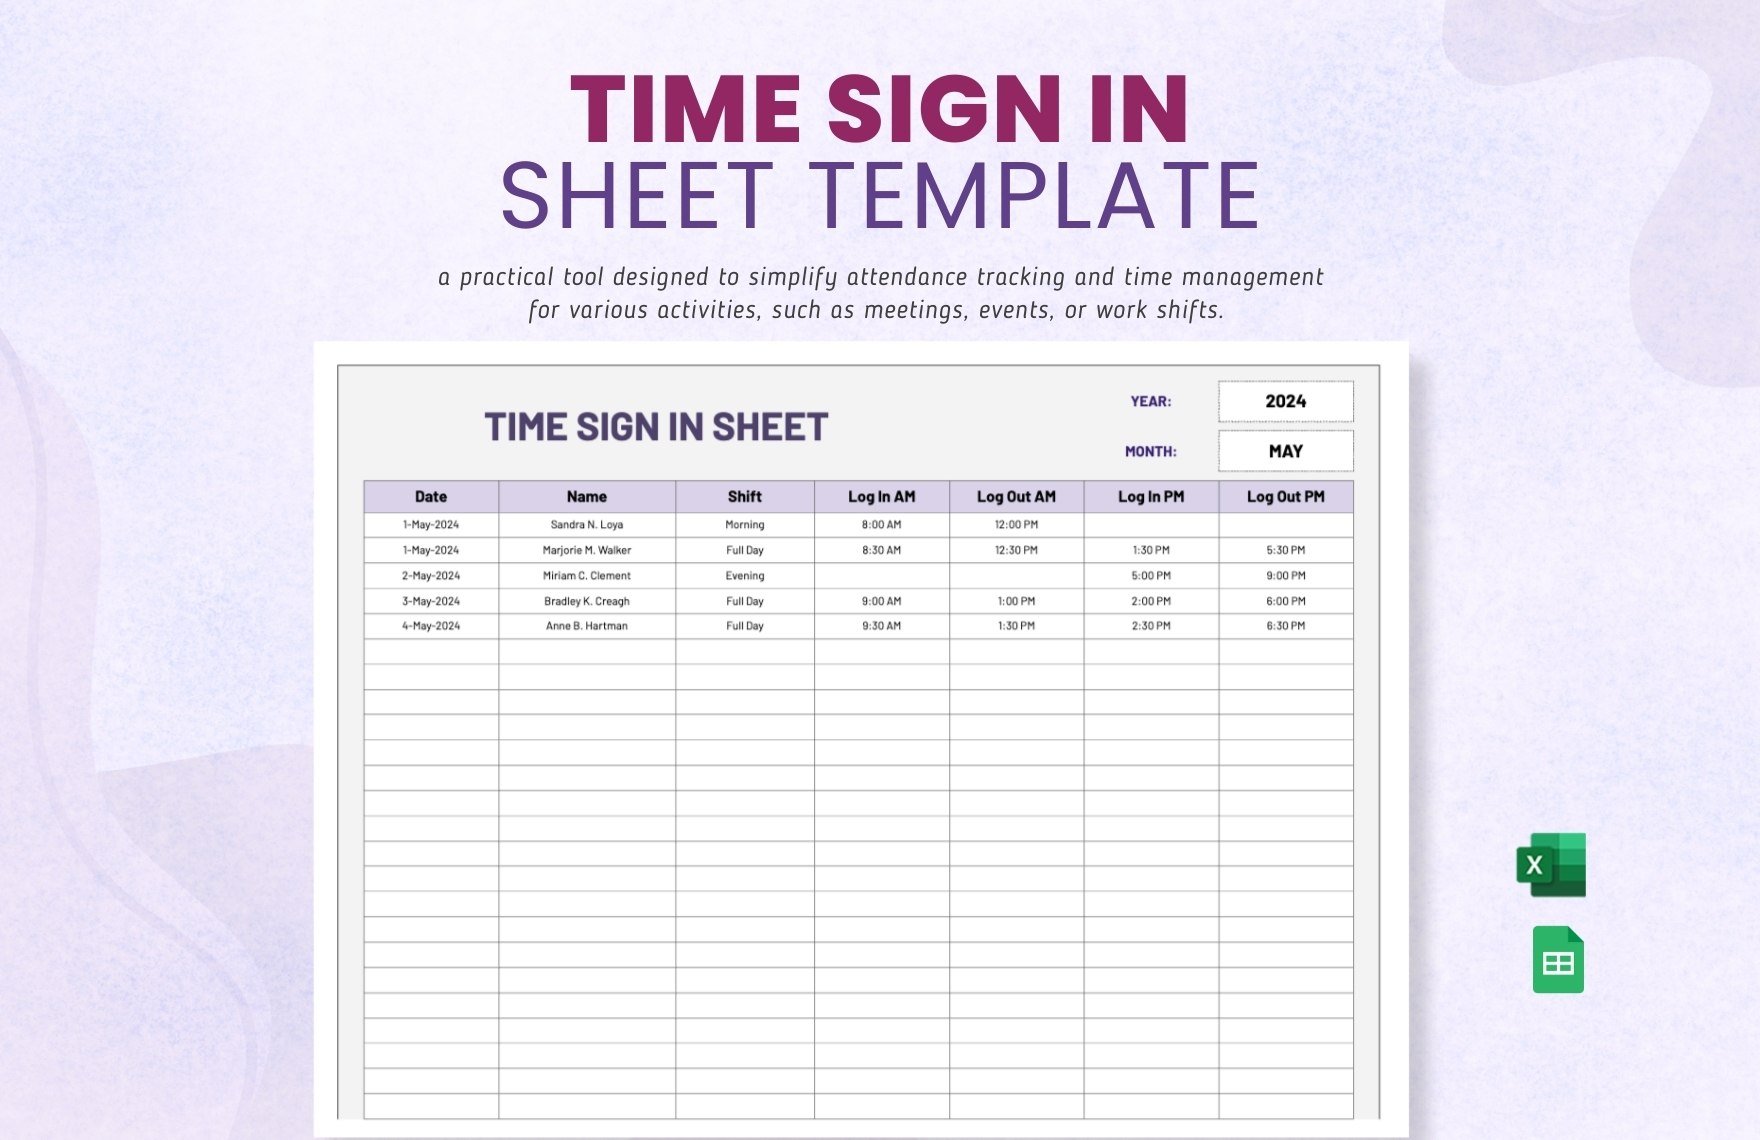 Time Sign in Sheet Template in Excel, Google Sheets